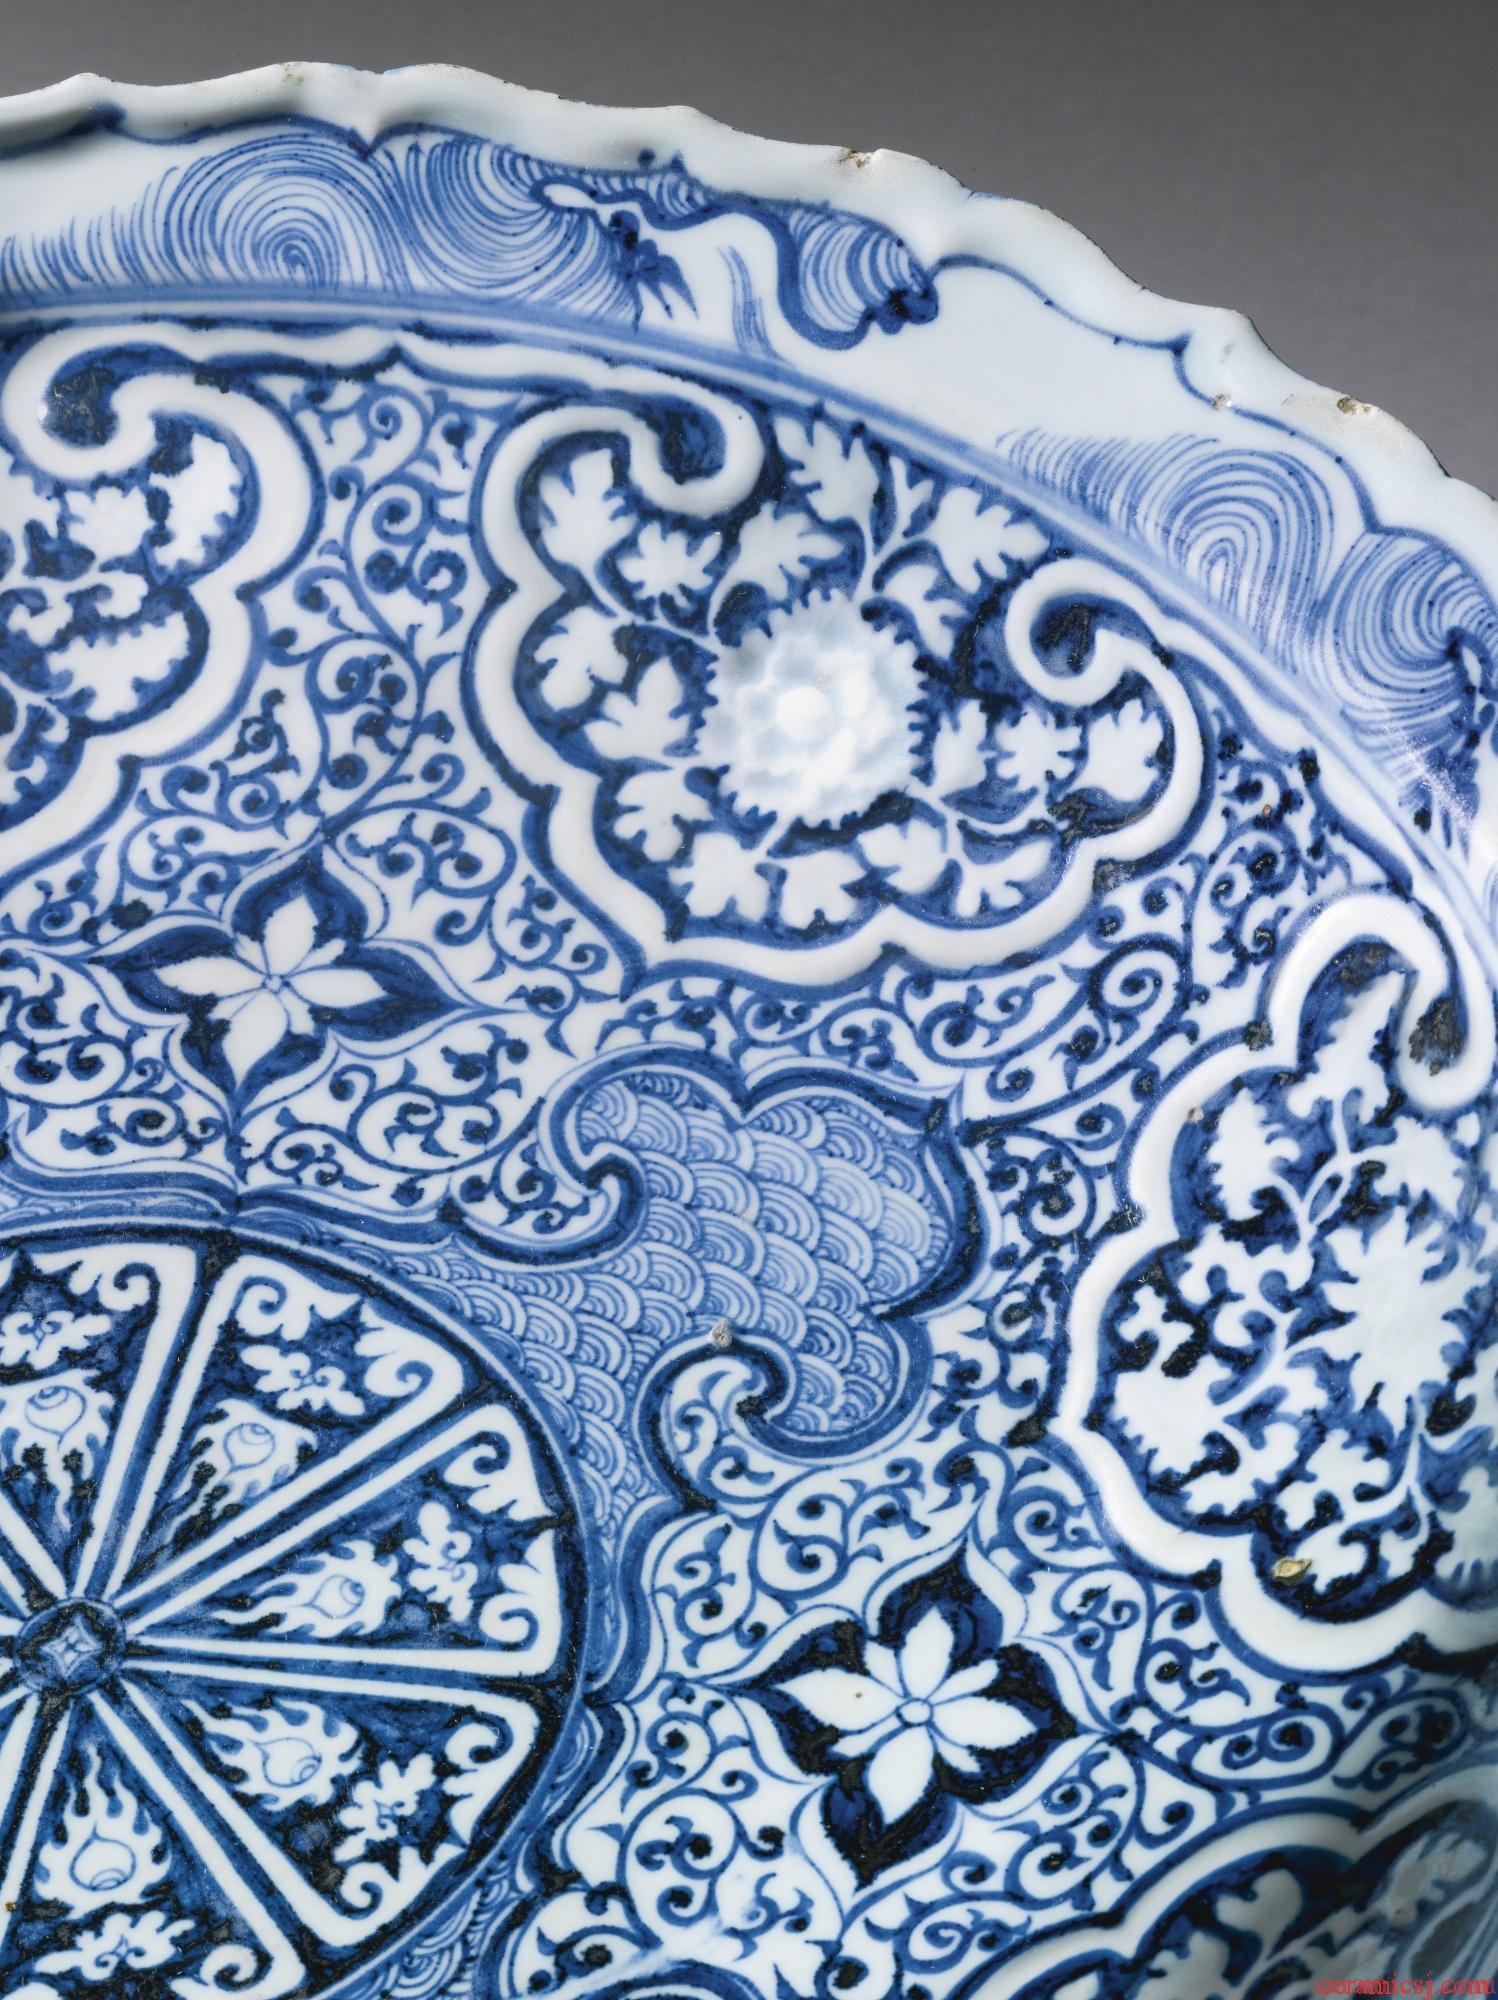 Sothebys:PROPERTY FROM A PRIVATE COLLECTION A RARE MOLDED BLUE AND WHITE BARBED RIM DISH YUAN DYNASTY, 14TH CENTURY Estimate   200,000 — 300,000  USD  LOT SOLD.	4,197,000 USD